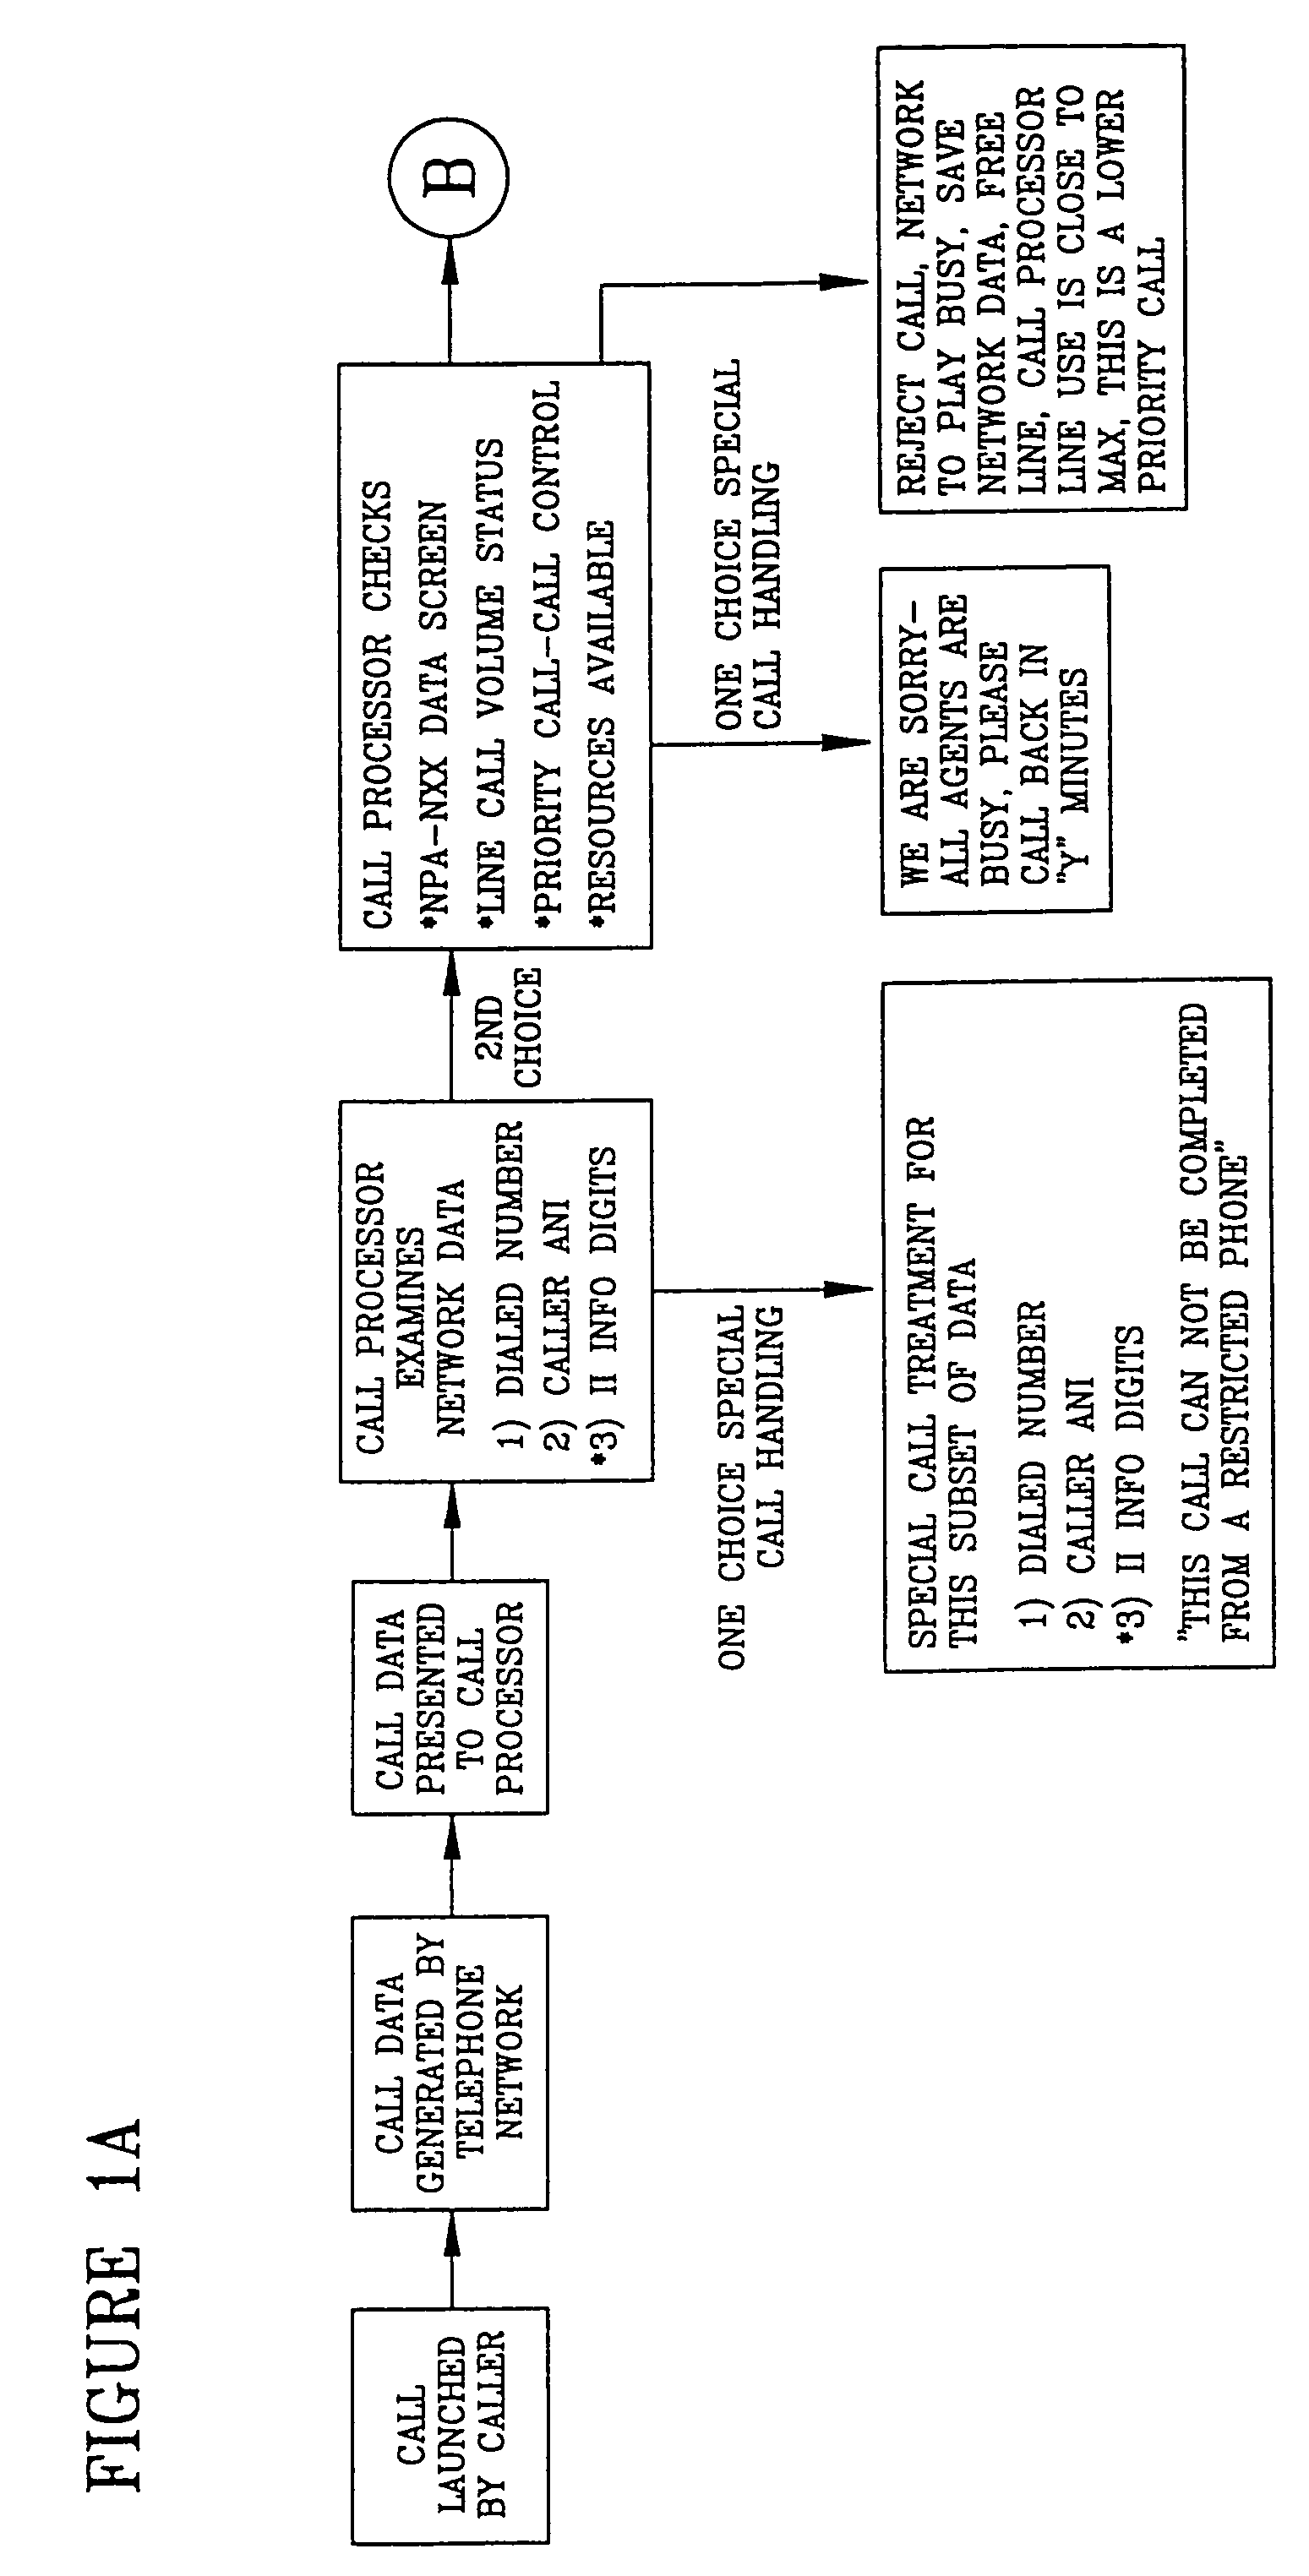 Call processing system with call screening